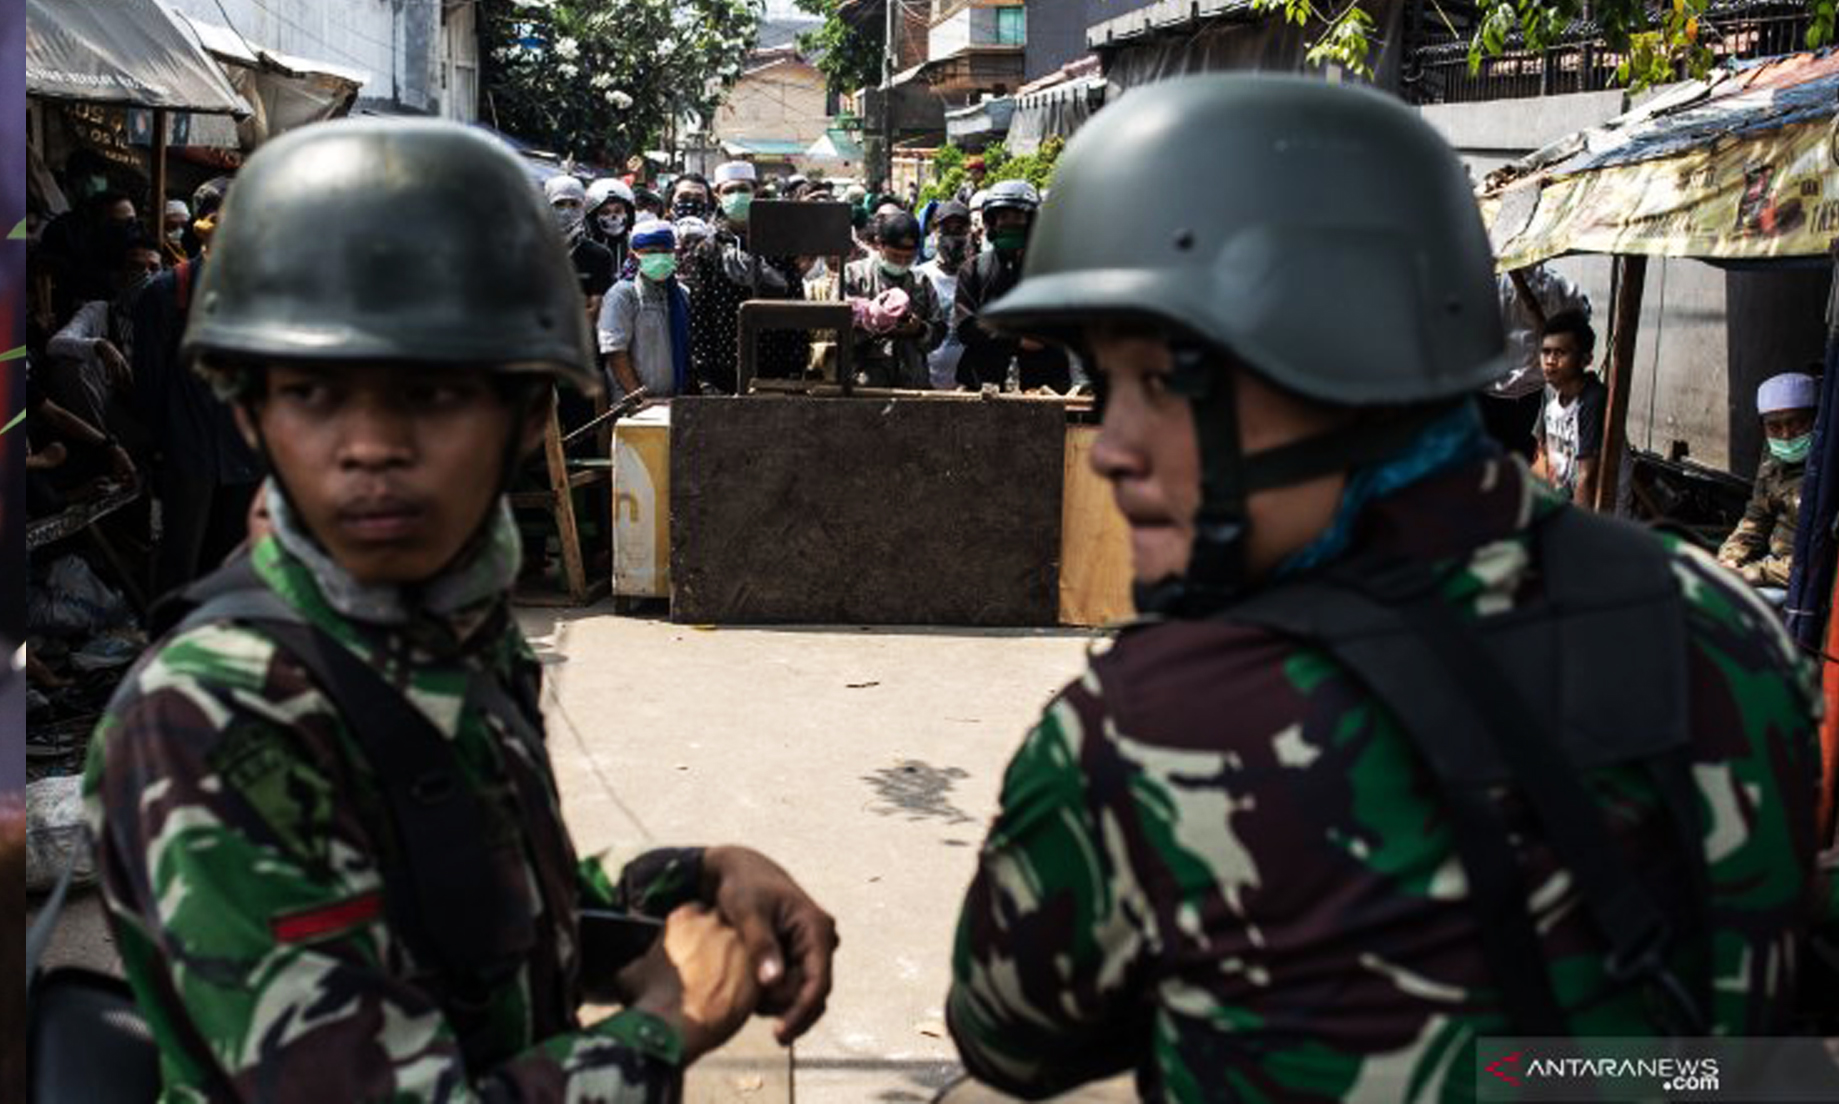 Indonesian police, protesters clash over polls, Deaths reported